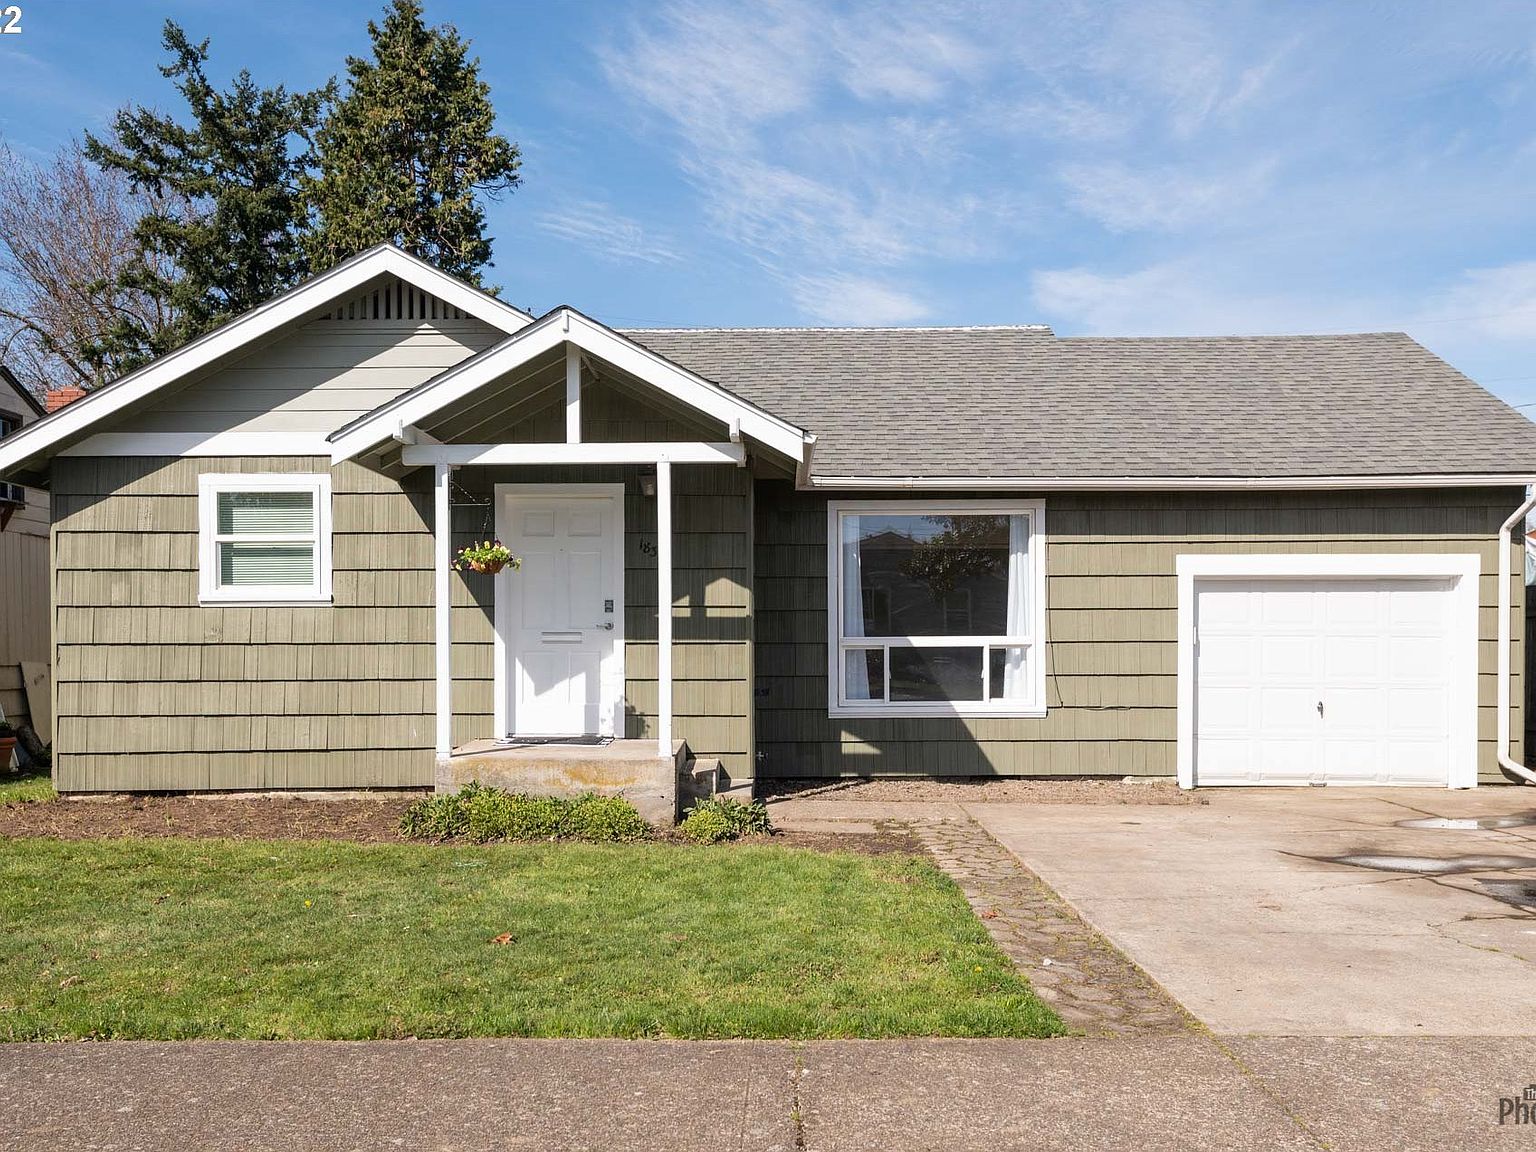 20 I St, Springfield, OR 20   MLS 20   Zillow